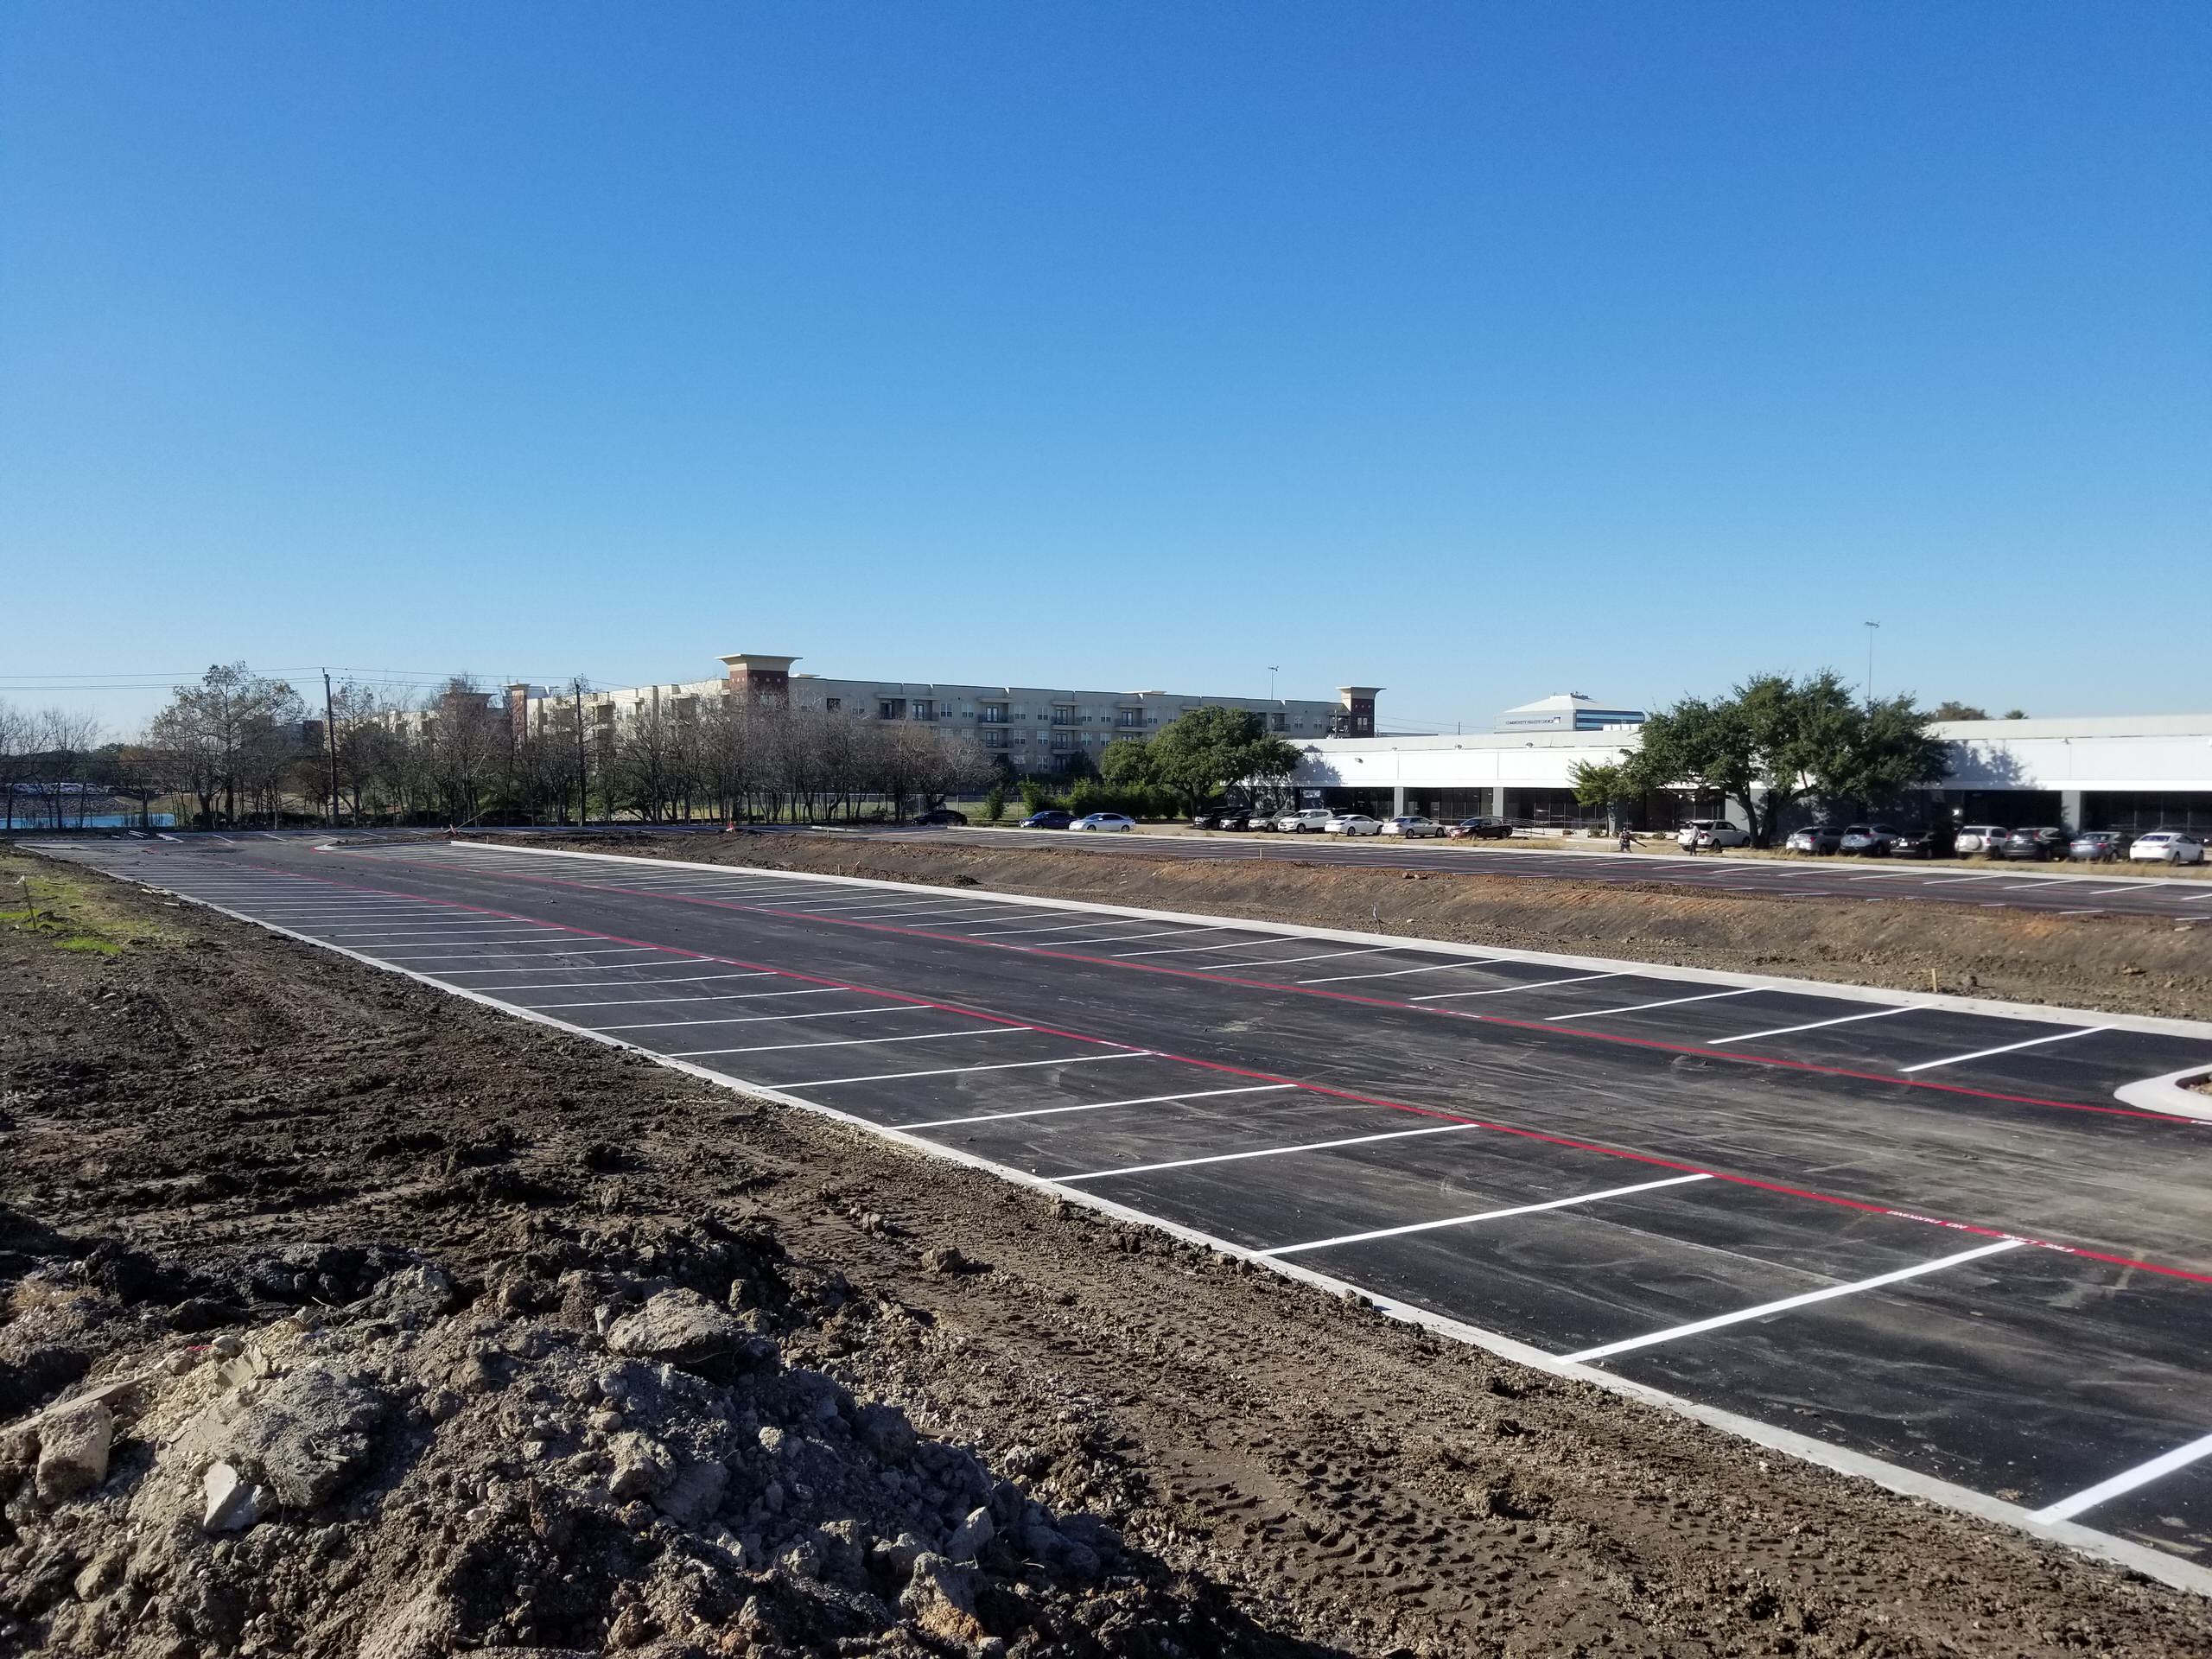 New Parking lots with retention